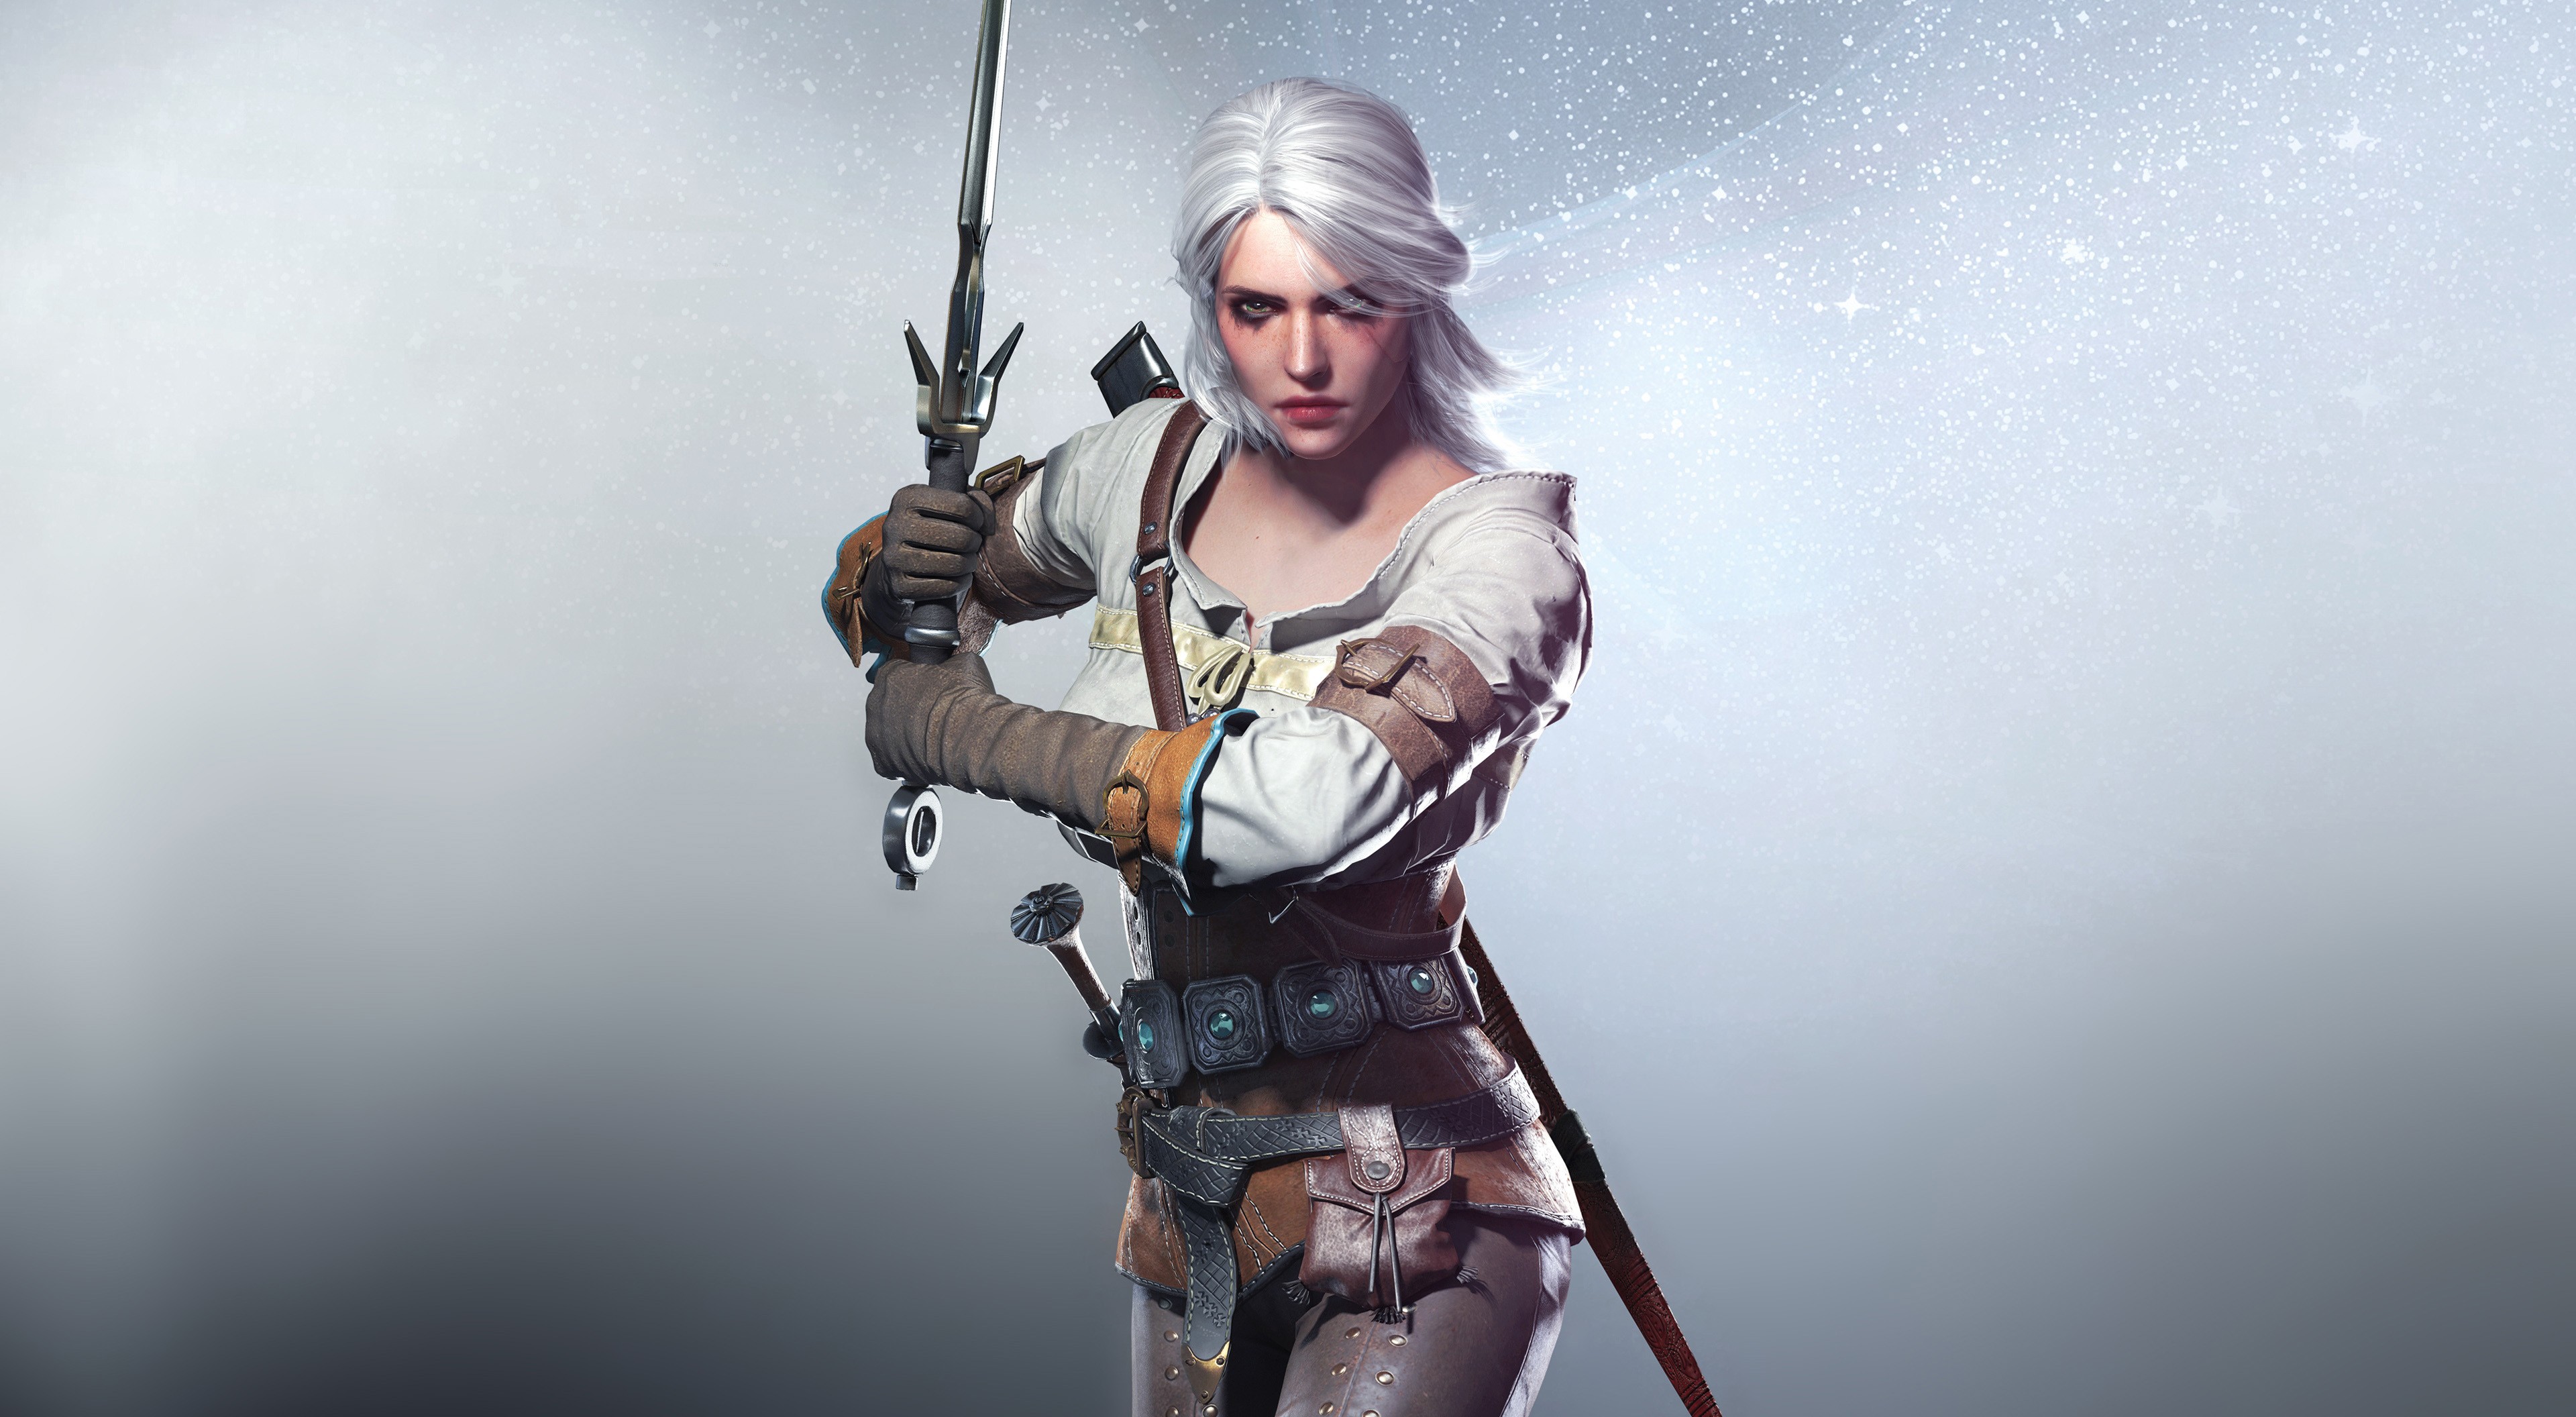 General 3840x2112 Cirilla Fiona Elen Riannon The Witcher 3: Wild Hunt The Witcher video games fantasy girl video game art video game girls fantasy art CD Projekt RED women with swords RPG sword